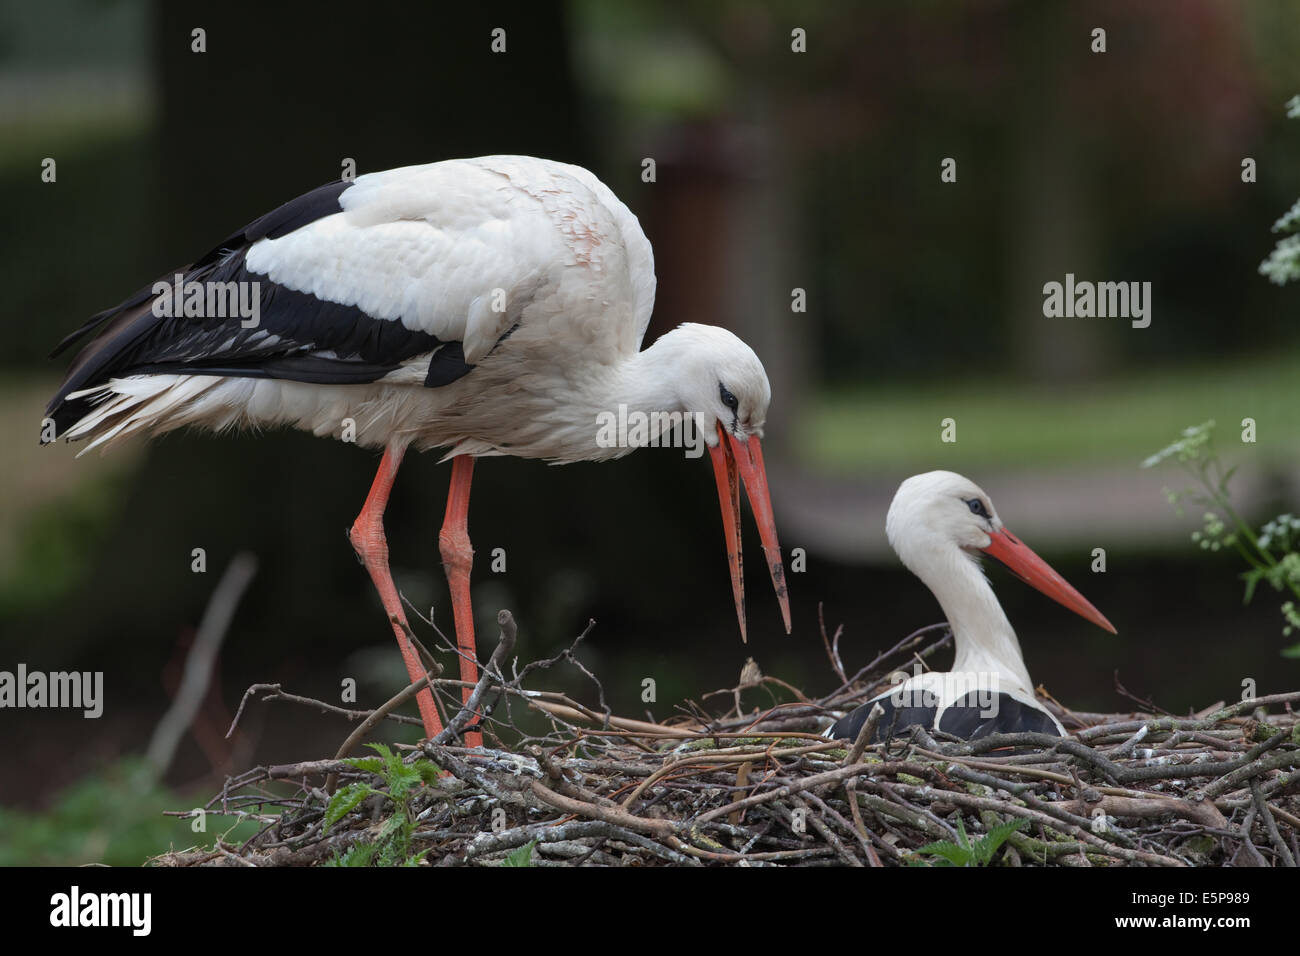 White Storks (Ciconia ciconia). Nesting pair. Male, standing left, regurgitating a pellet onto side of nest. Stock Photo